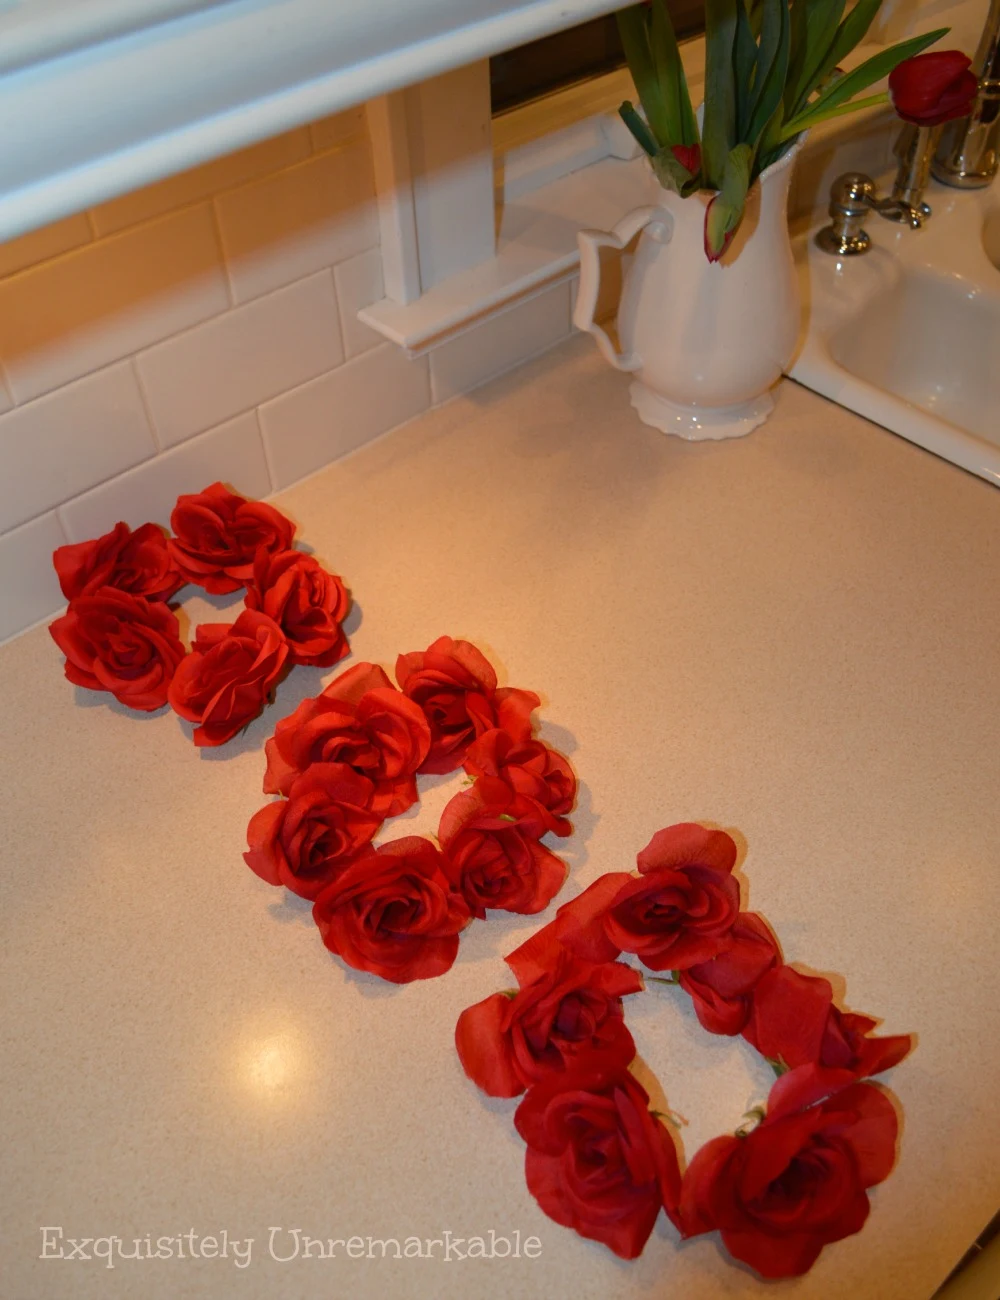 Three Red Floral Rings On kitchen counter